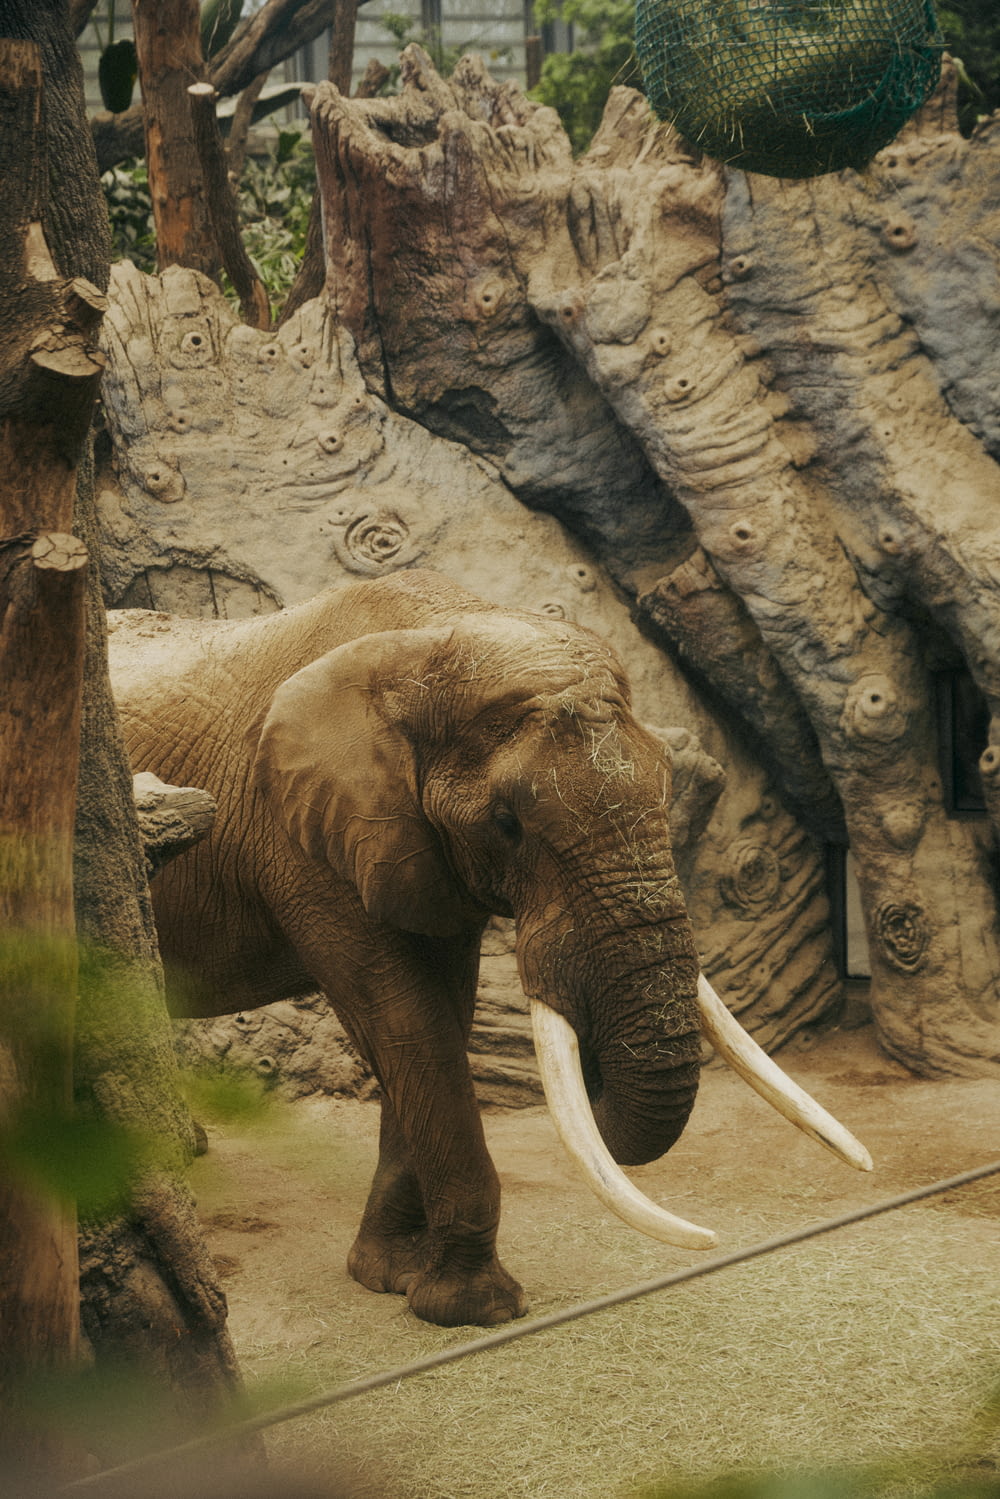 an elephant standing in a zoo enclosure next to a tree